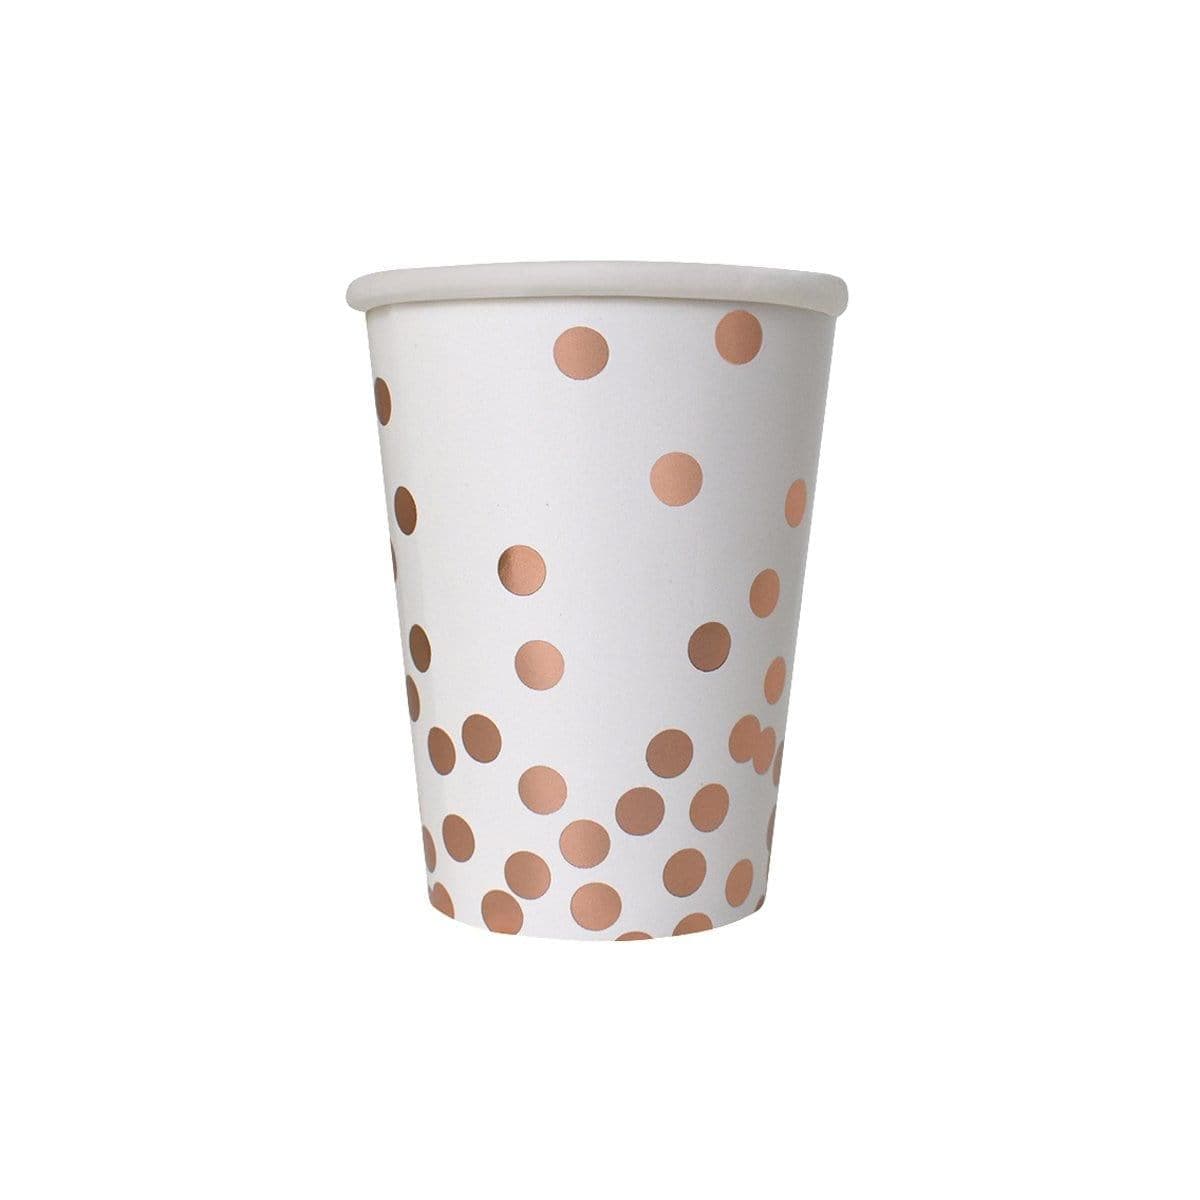 Buy Everyday Entertaining Cups 9 Oz. - 8/Pkg - Rose Gold sold at Party Expert